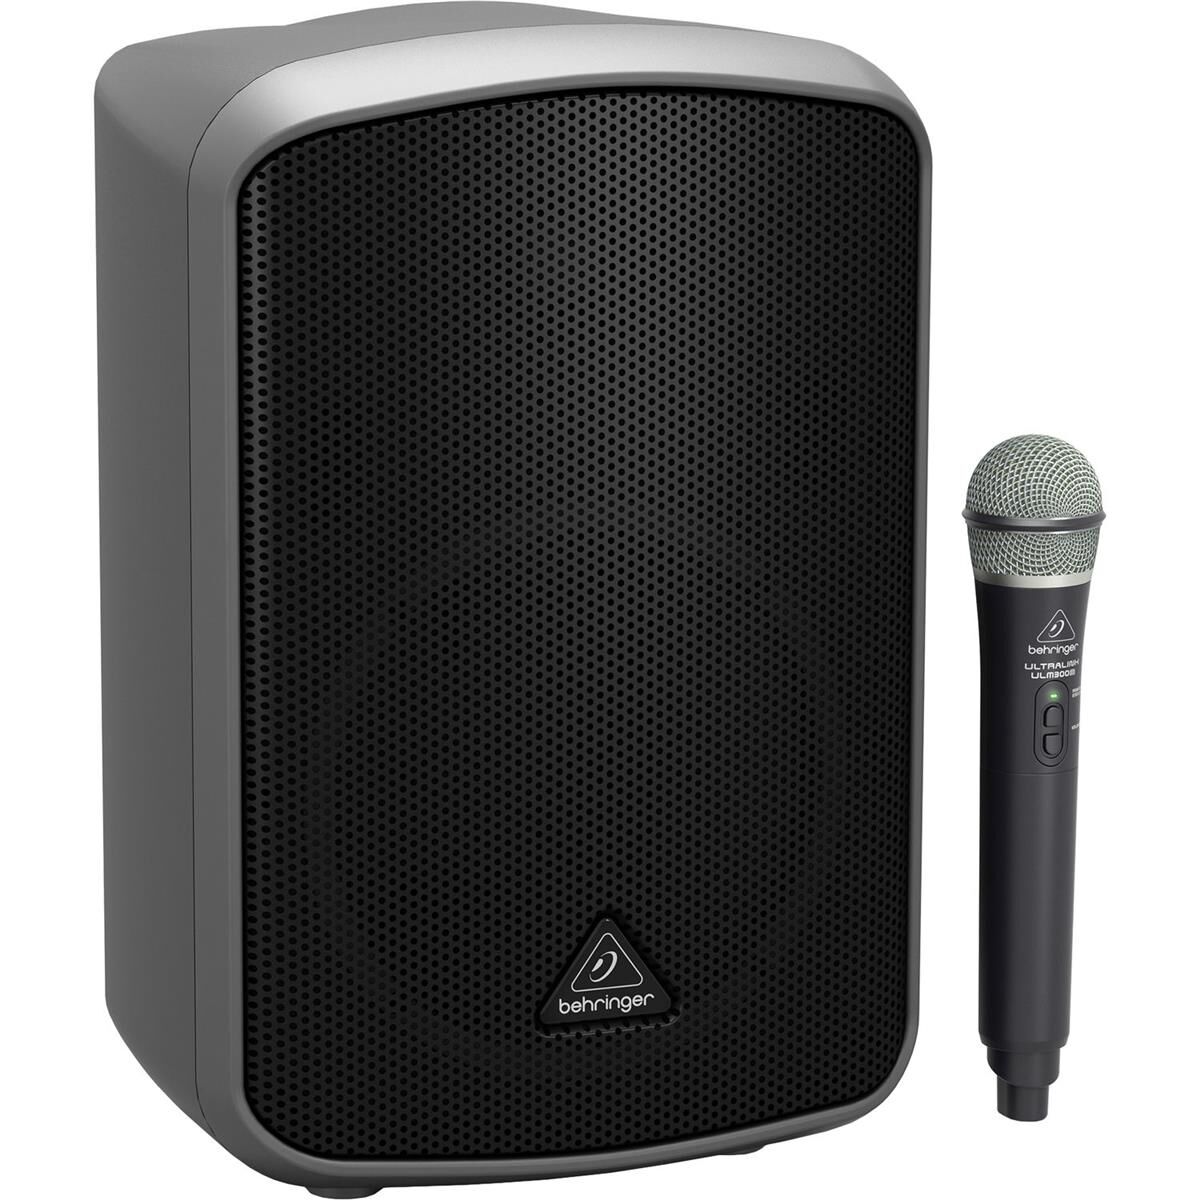 Behringer EUROPORT MPA200BT All-in-One Portable 200W Speaker with Microphone